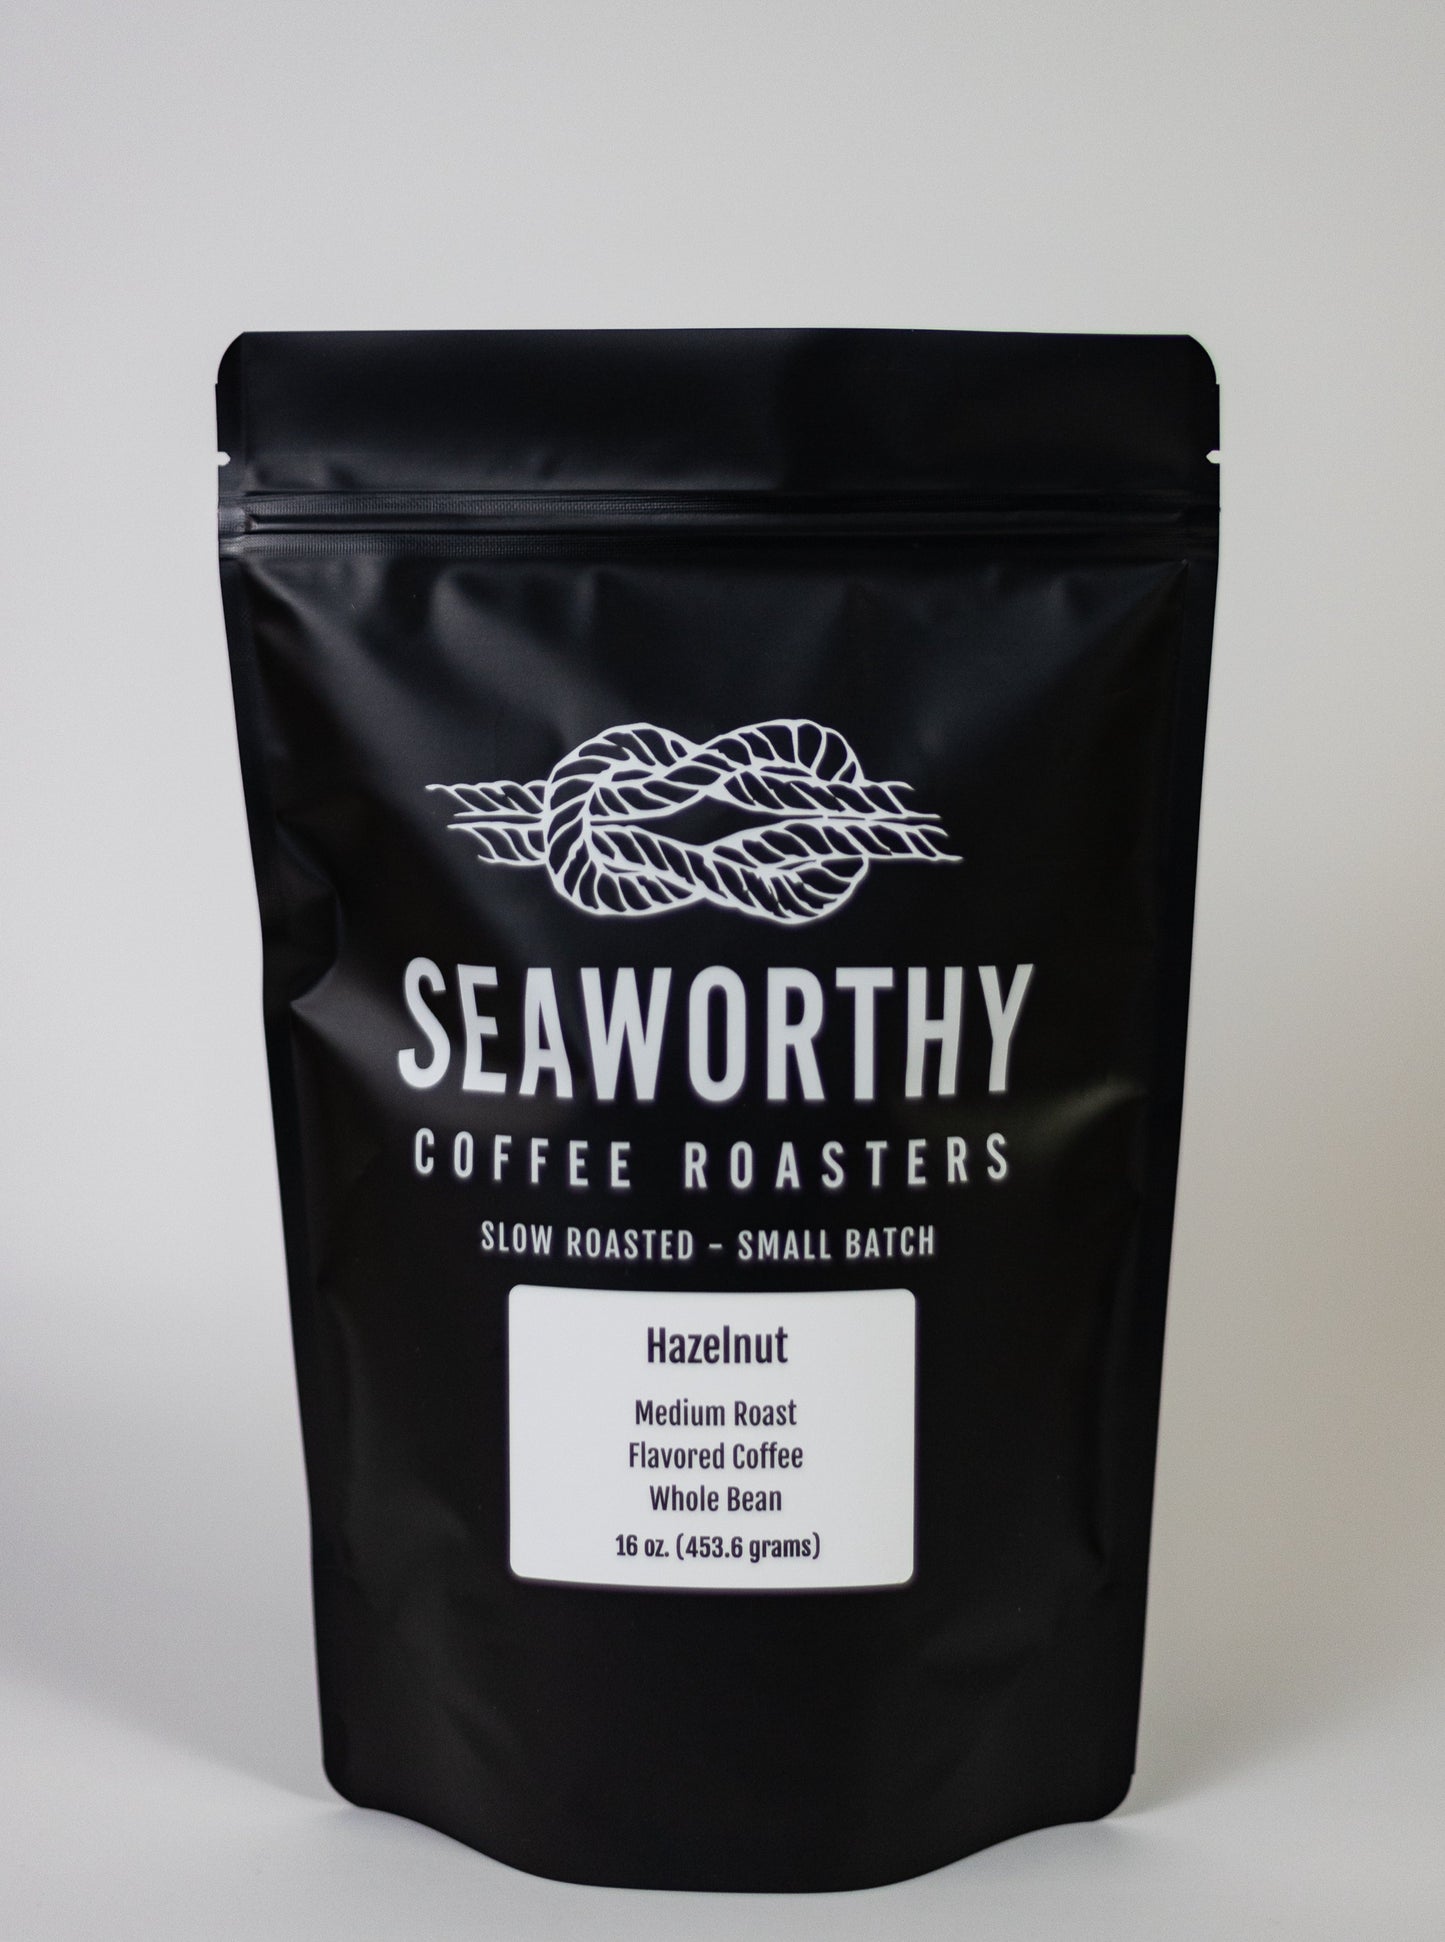 Seaworthy slow roasted, small batch coffee.  Our slow roasted coffee carries this classic flavor deliciously!  Smooth and creamy, hazelnut flavored Seaworthy coffee will have you soaking in the moment with each sip.